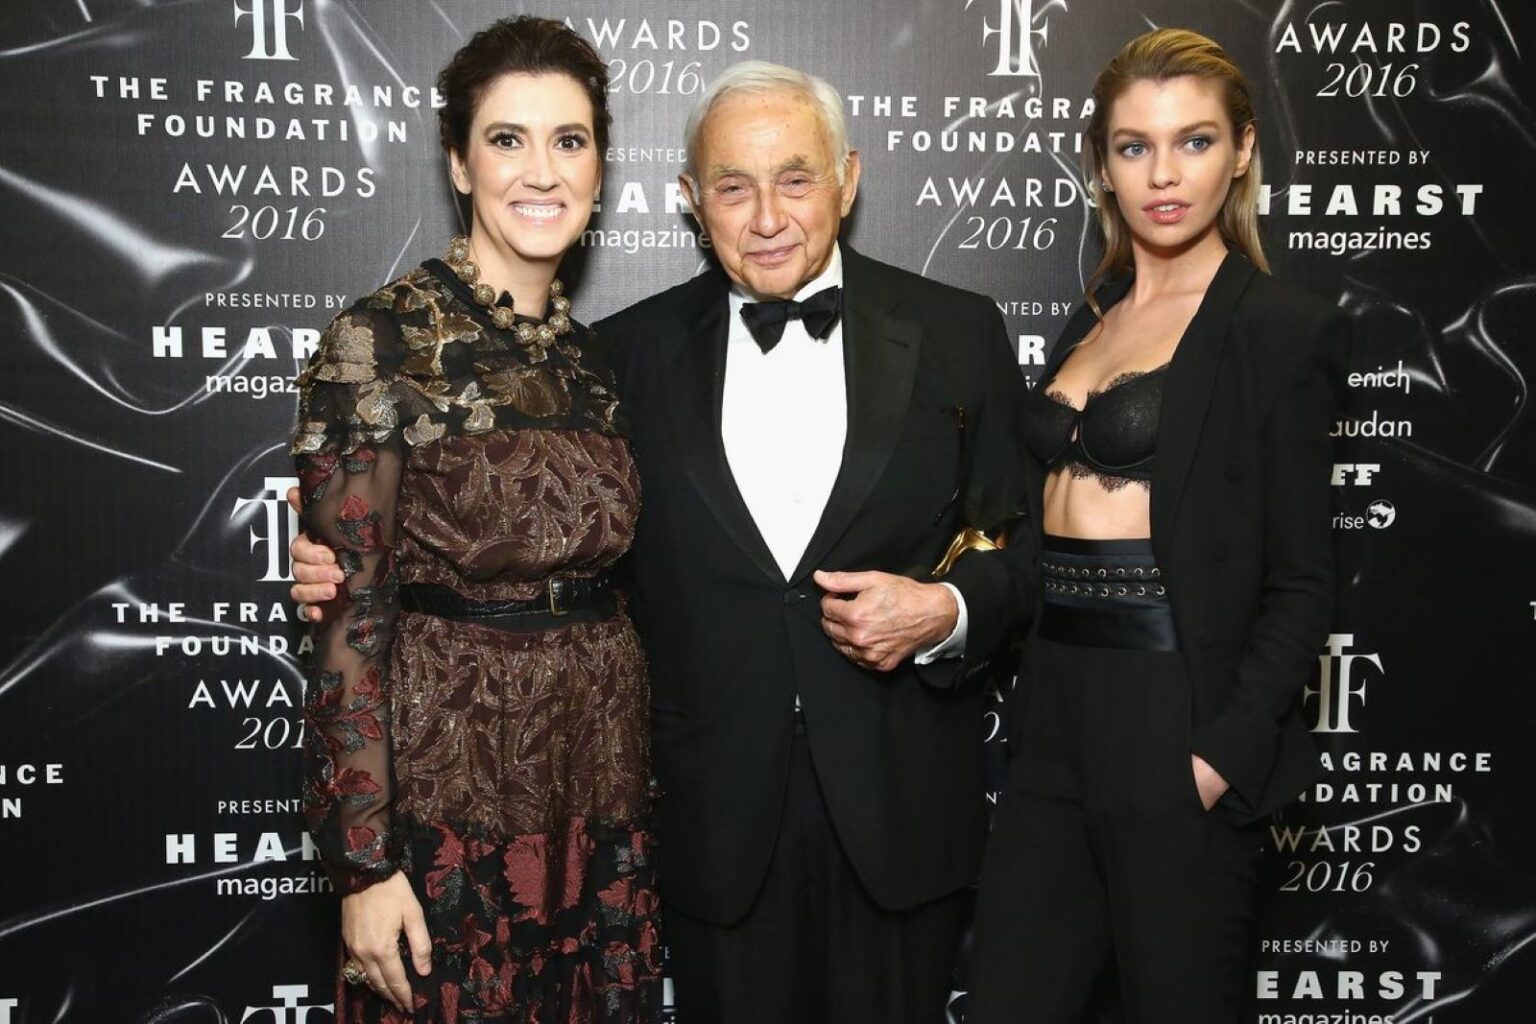 What new information will Leslie Wexner reveal about his friendship with Jeffrey Epstein? Learn about the former L Brands CEO and his ties to Epstein.